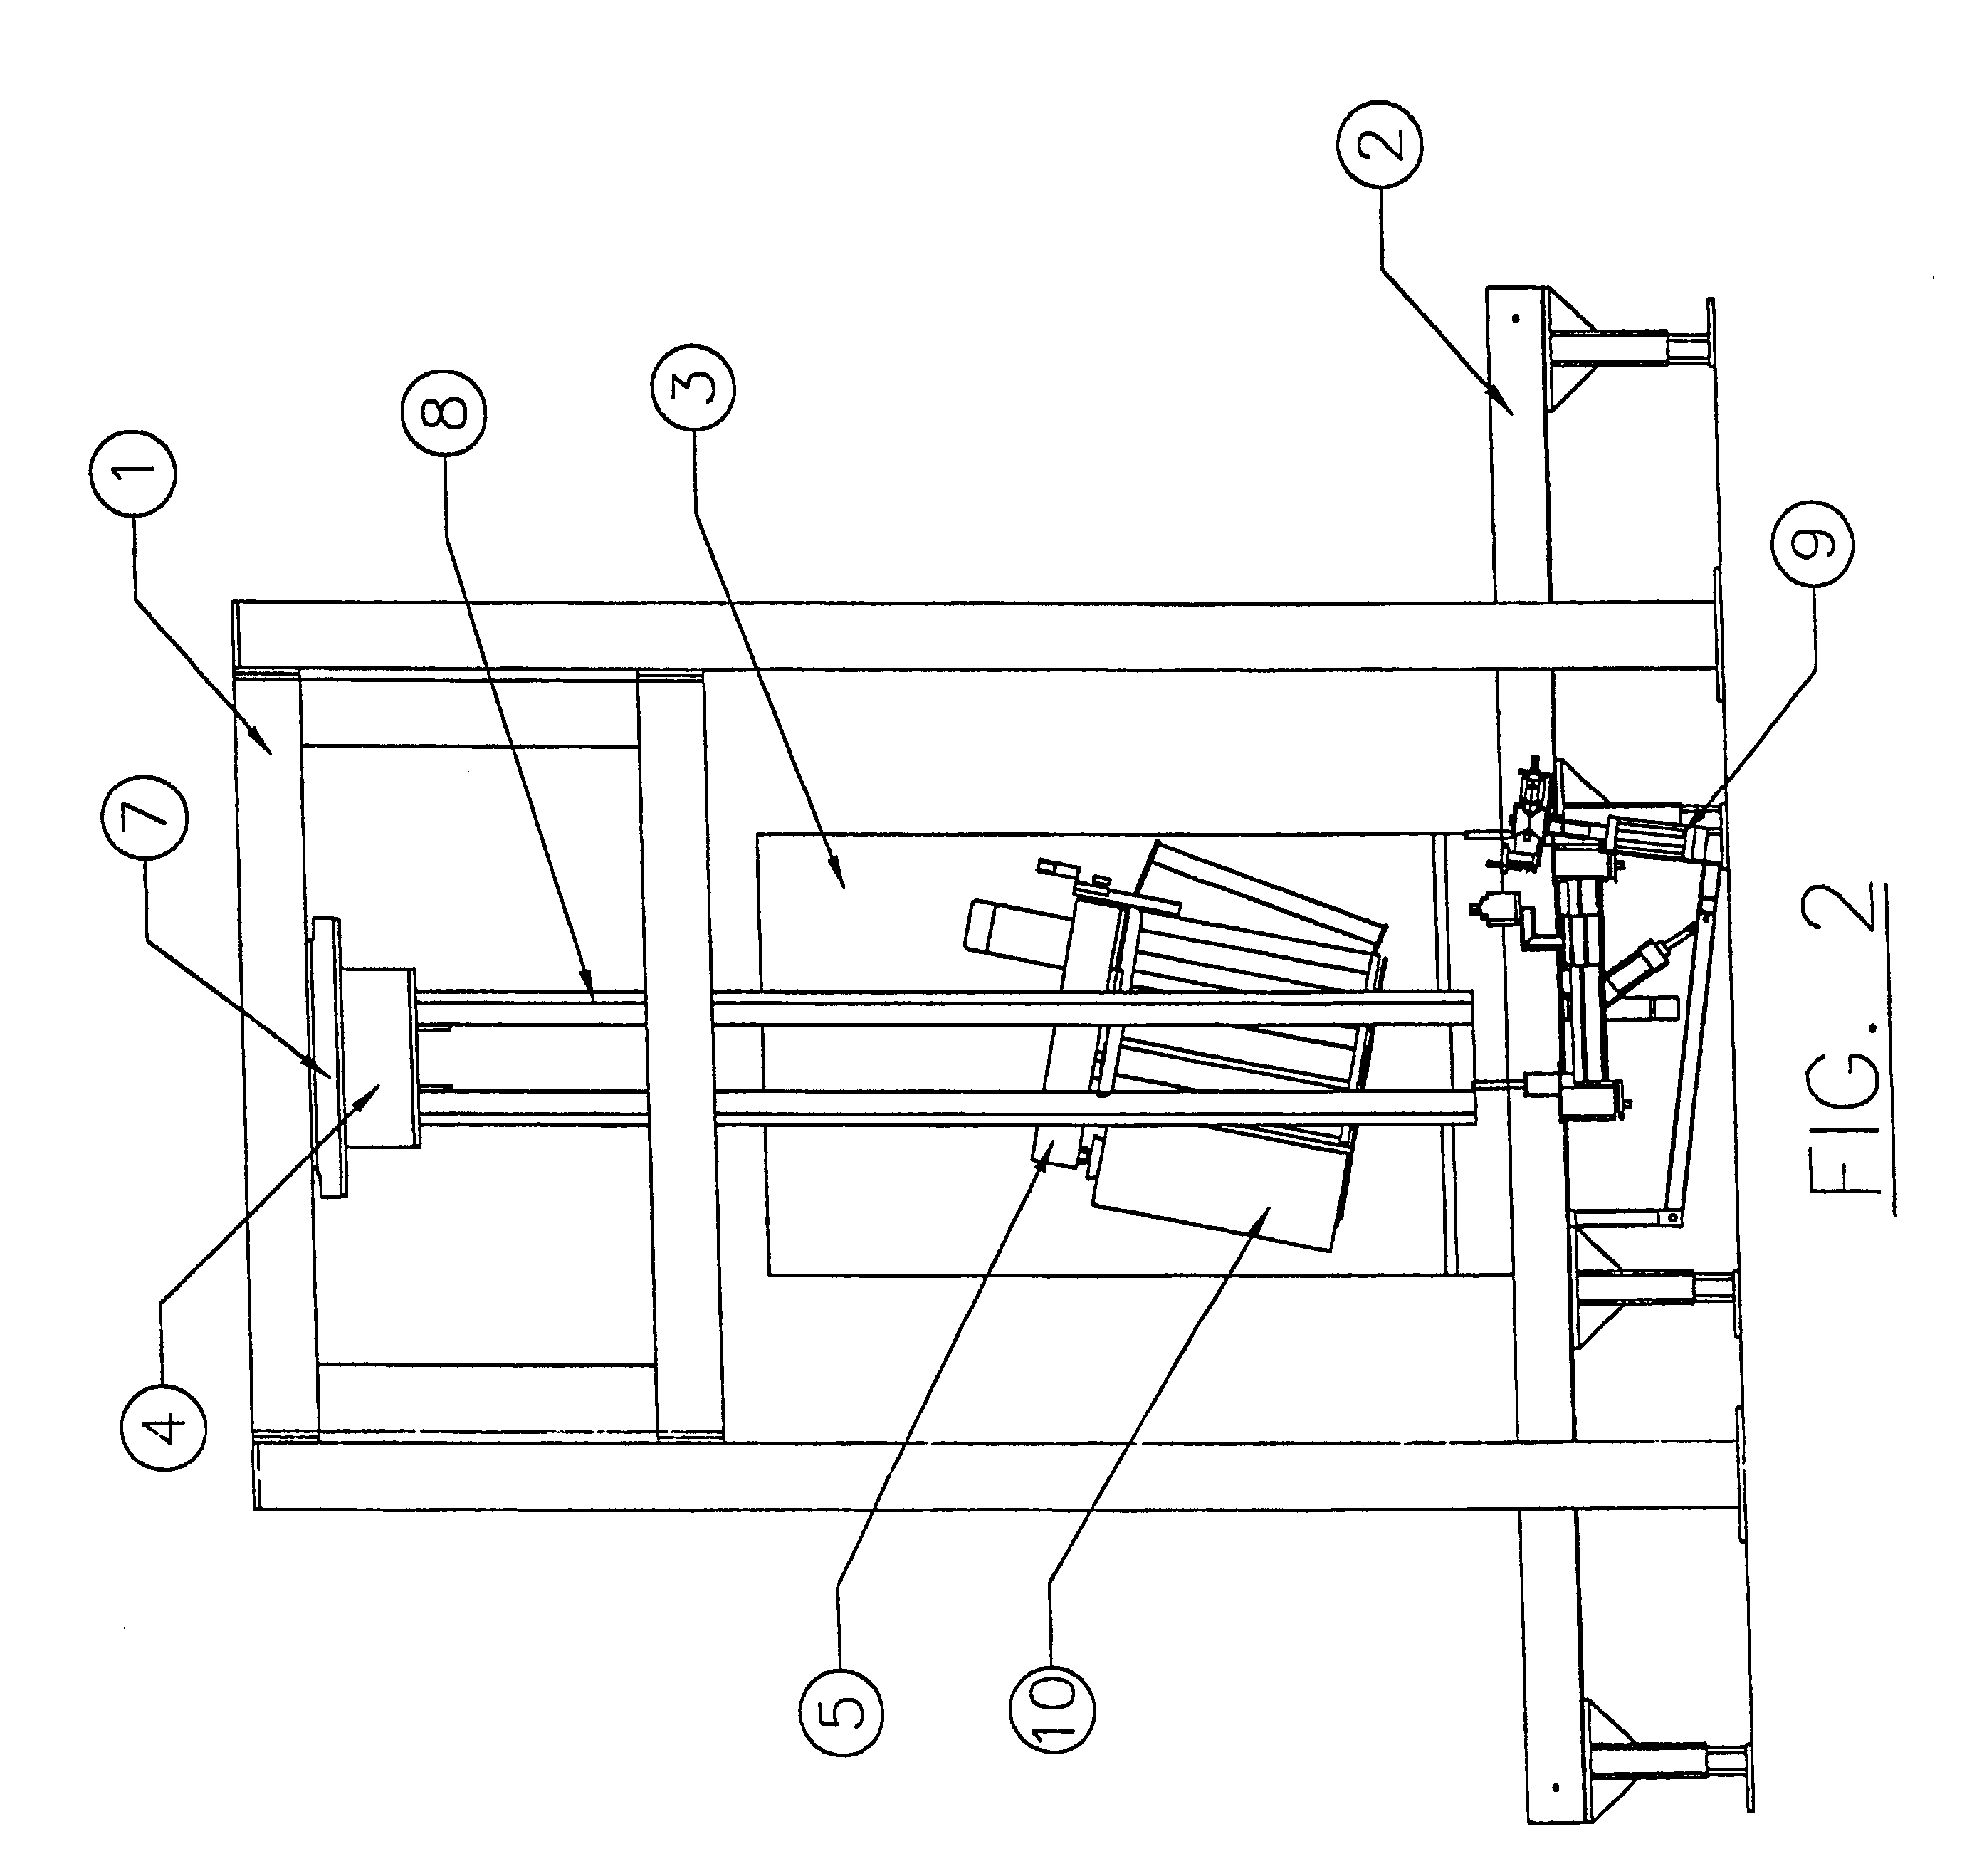 Apparatus for wrapping a load